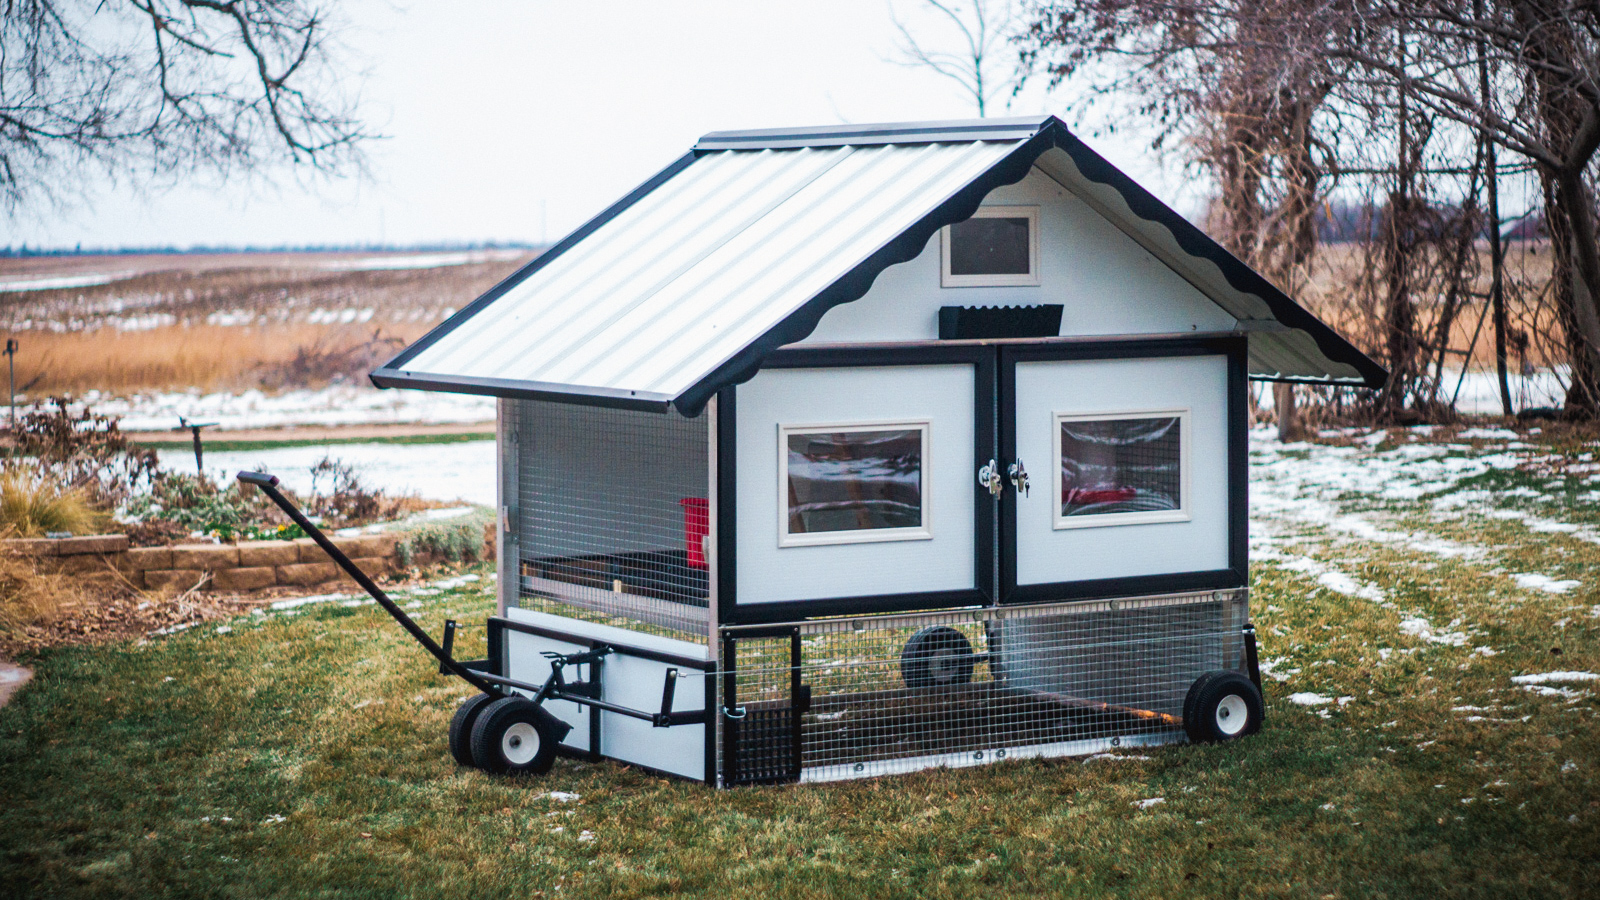 The Chalet: A Chicken Coop Kit on Wheels